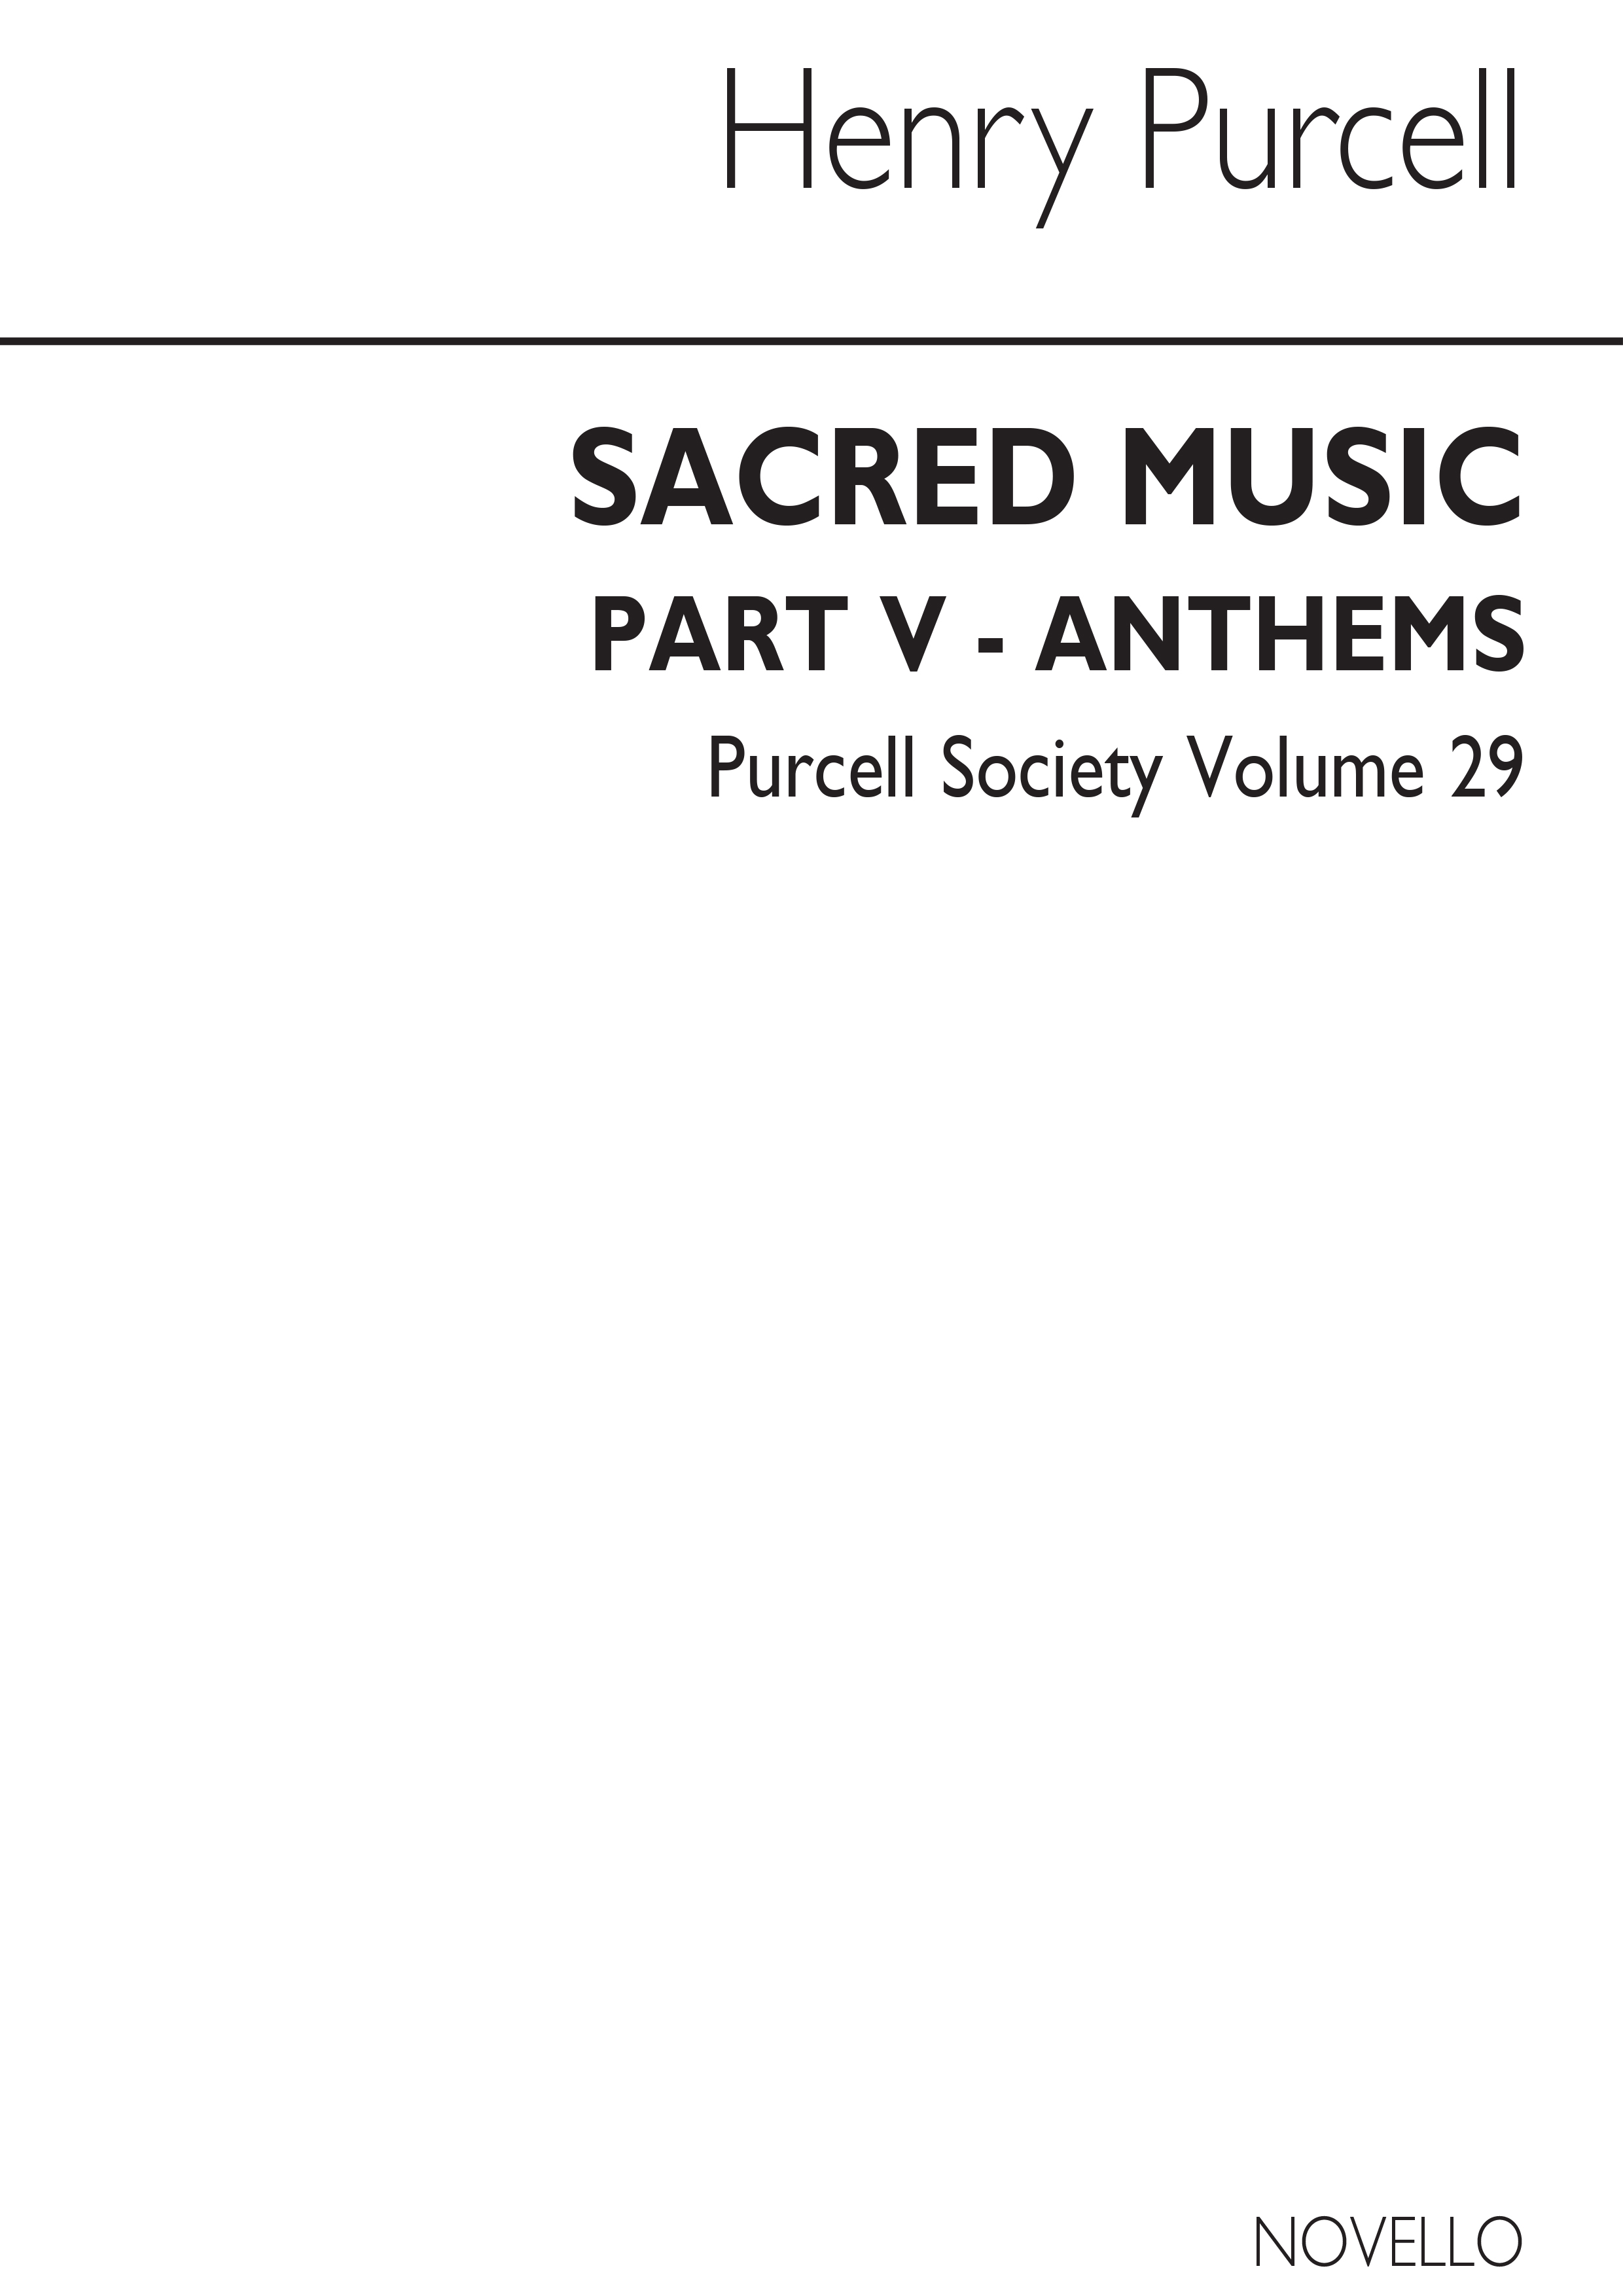 Henry Purcell: Purcell Society Volume 29 - Sacred Music Part 5: SATB: Score